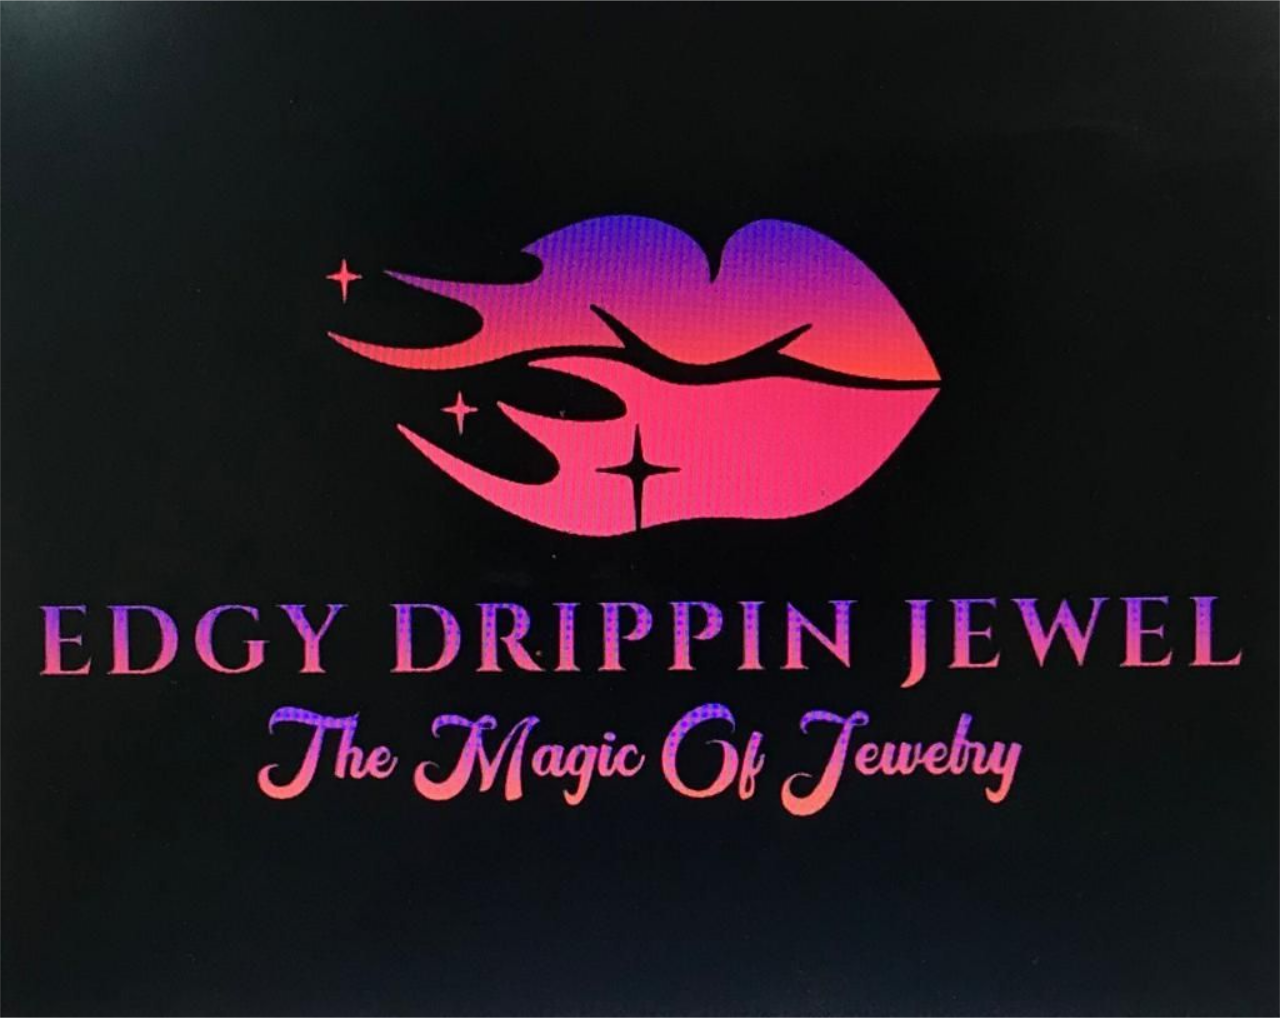 Edgy Drippin Jewel's web page